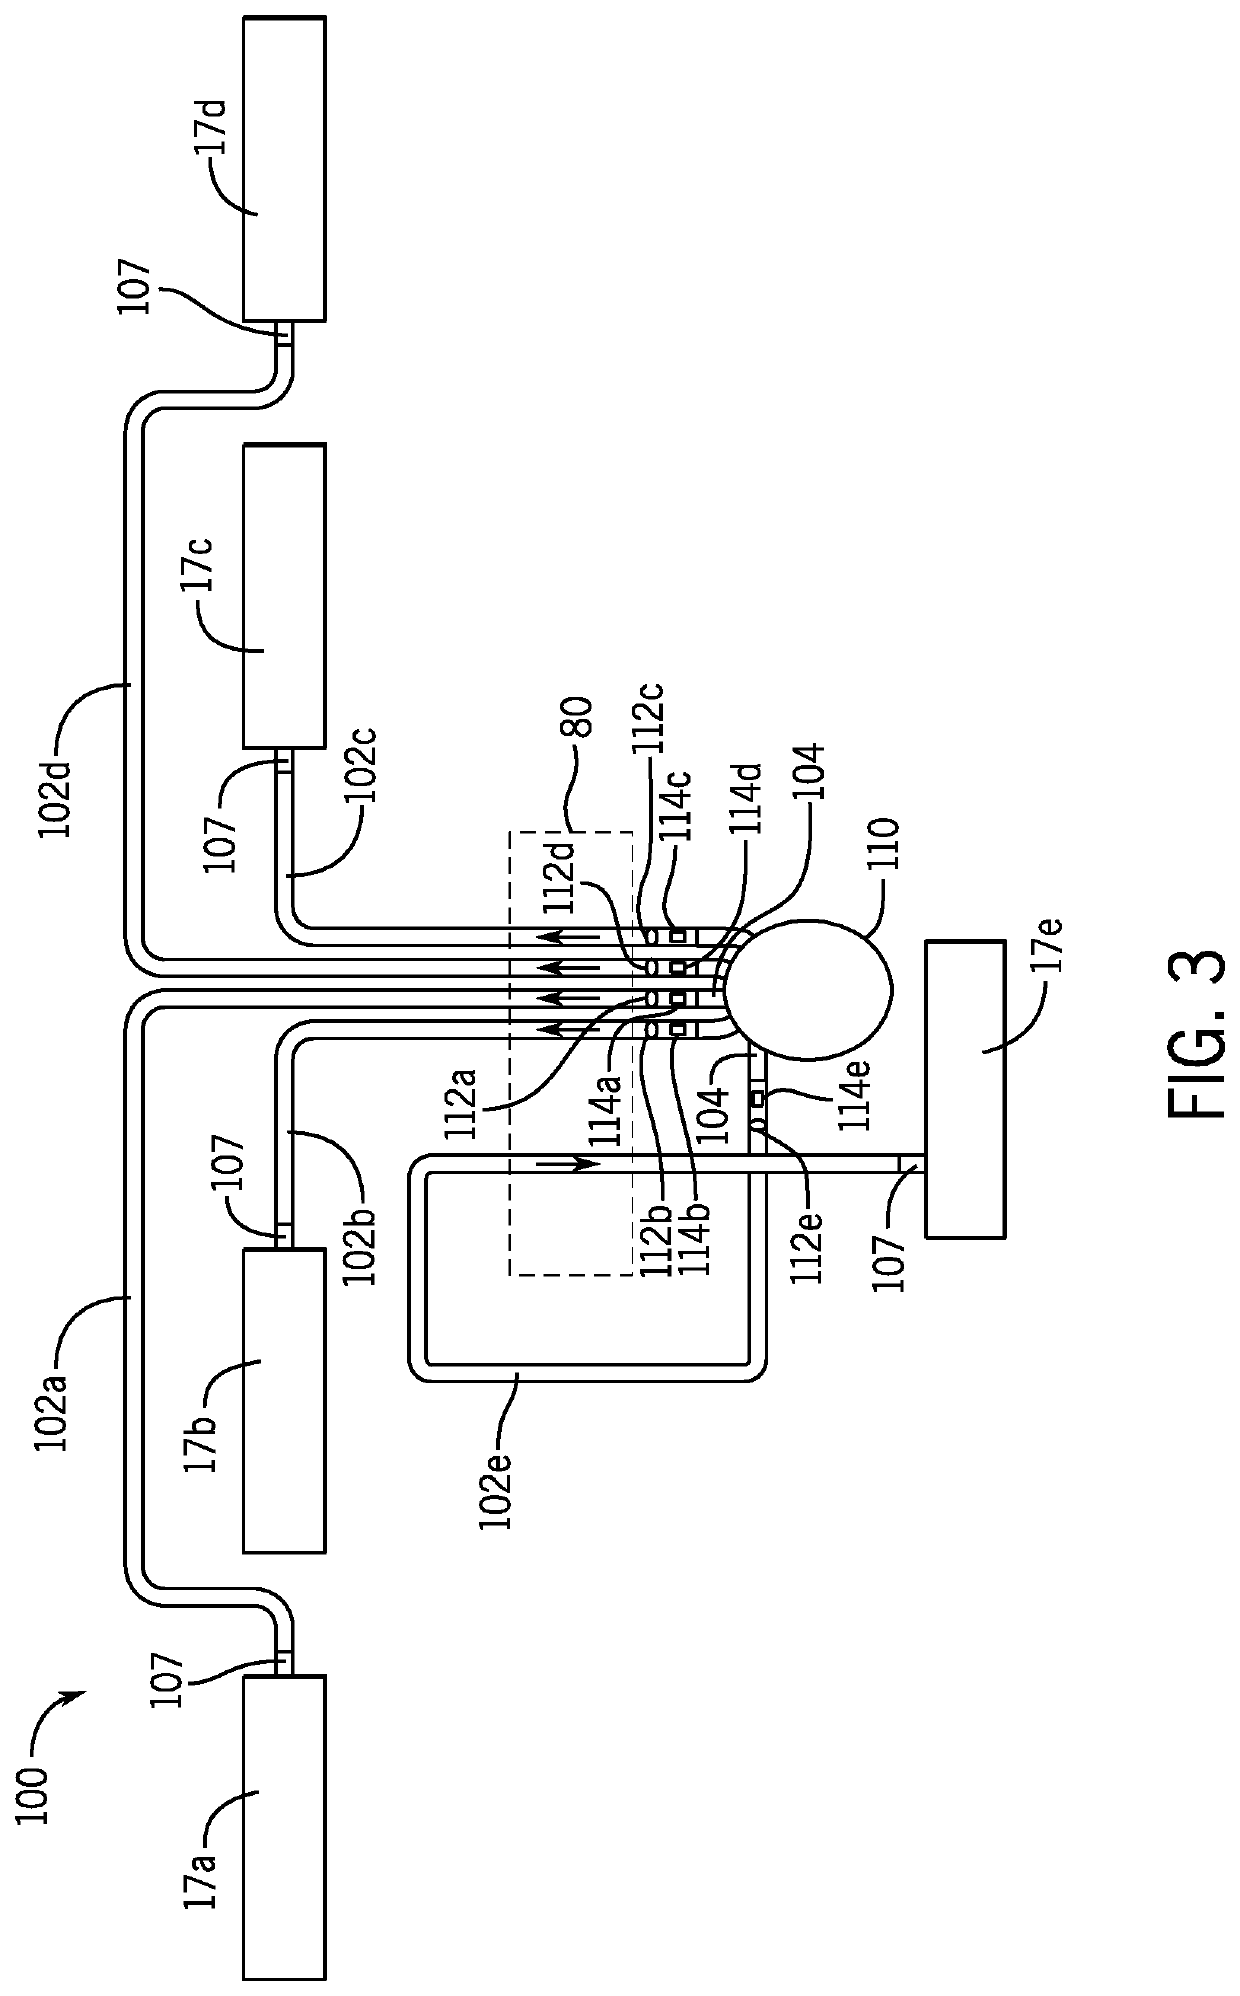 Electronically Controlled Valve System For Distributing Particulate Material